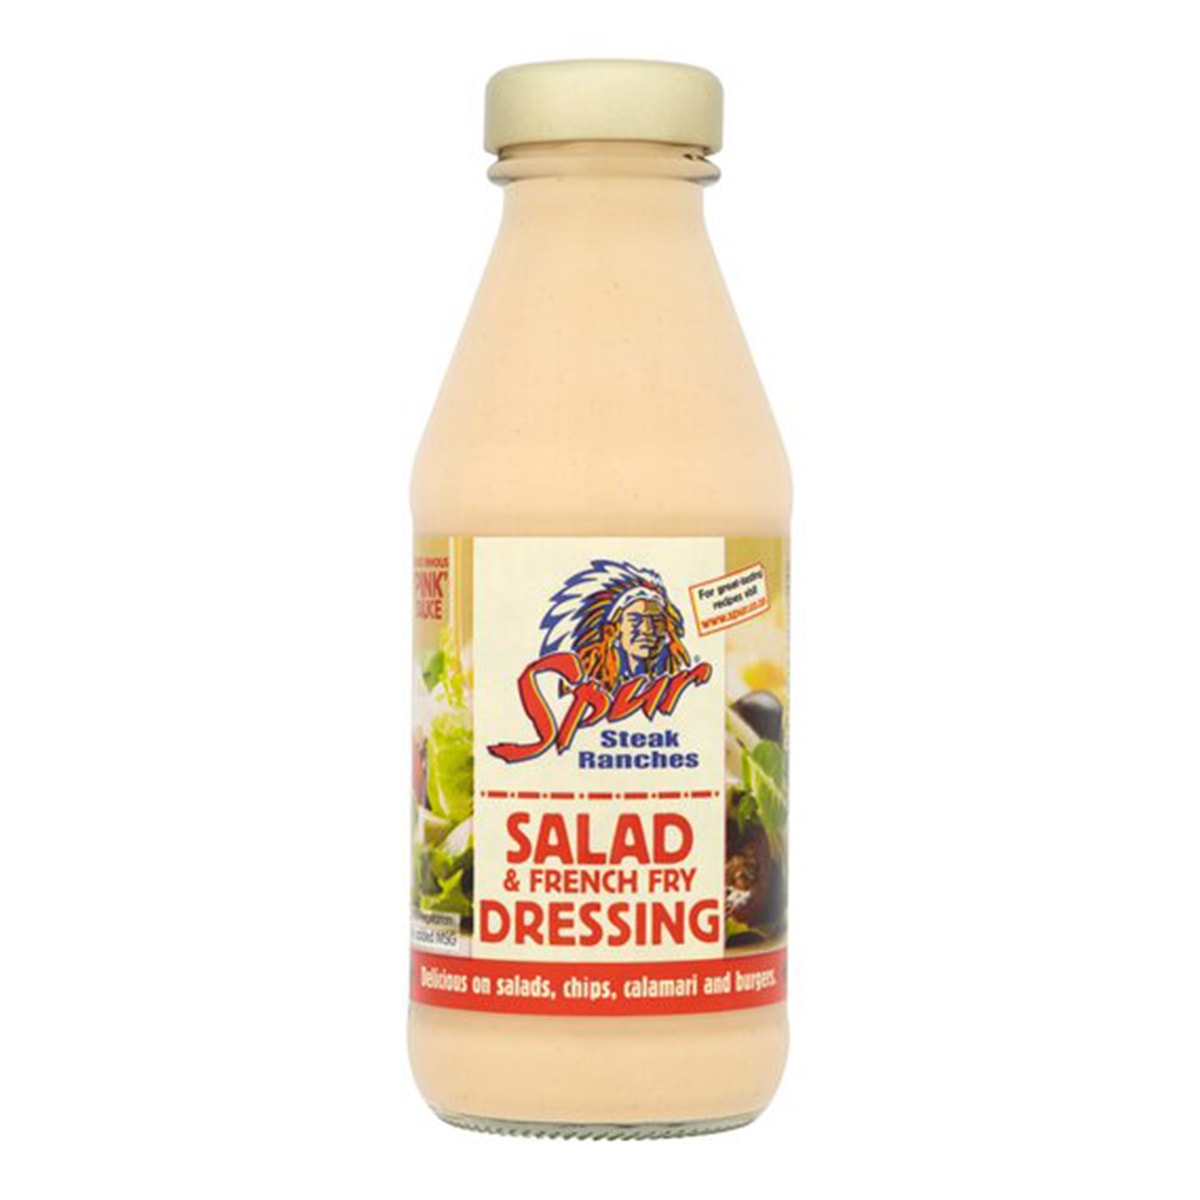 Buy Spur Salad and French Fry Dressing - 500 ml